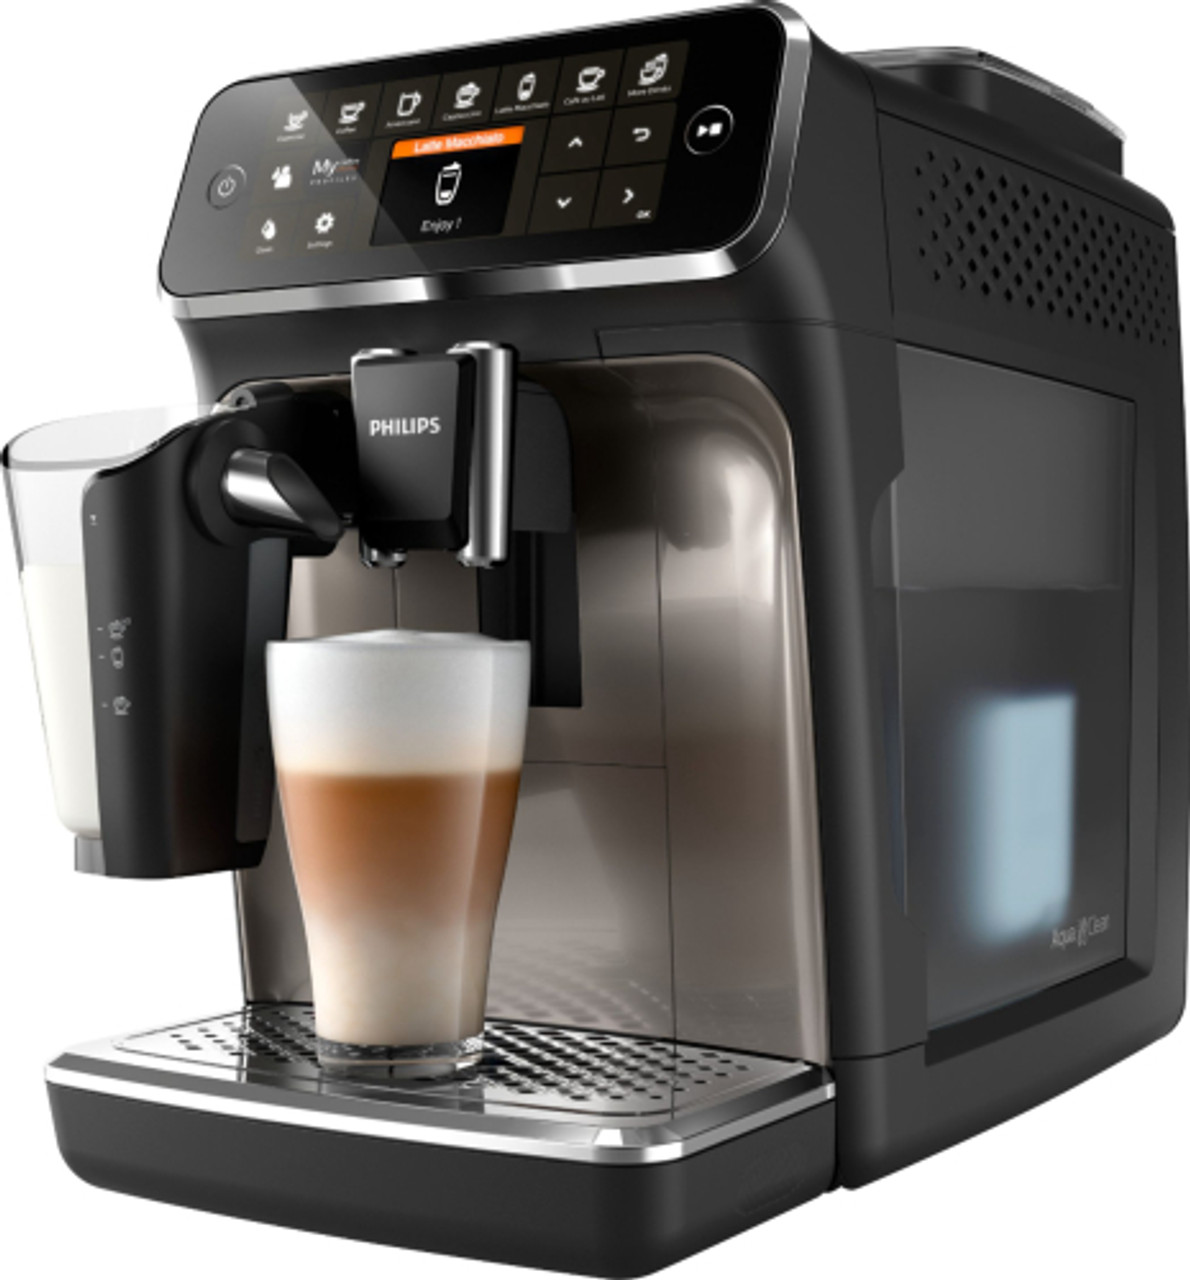 Philips - Phlips 4300 Fully Automatic Espresso Machine with LatteGo, CR, EP4347/94 - Silver